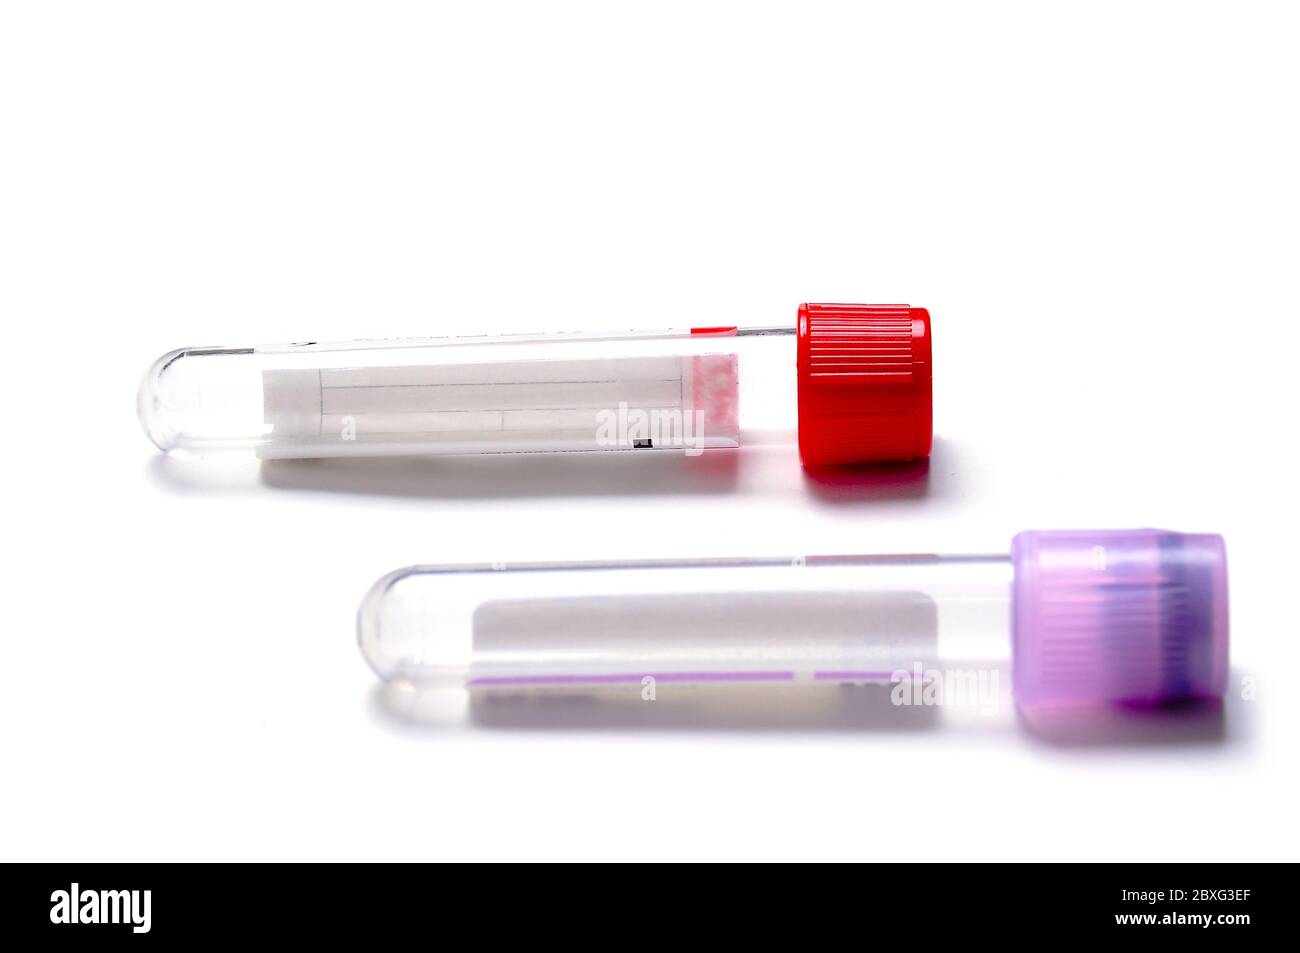 Vacutainer Plastic Serum Tube used for evacuated sterile blood collection tube for serum analysis Stock Photo